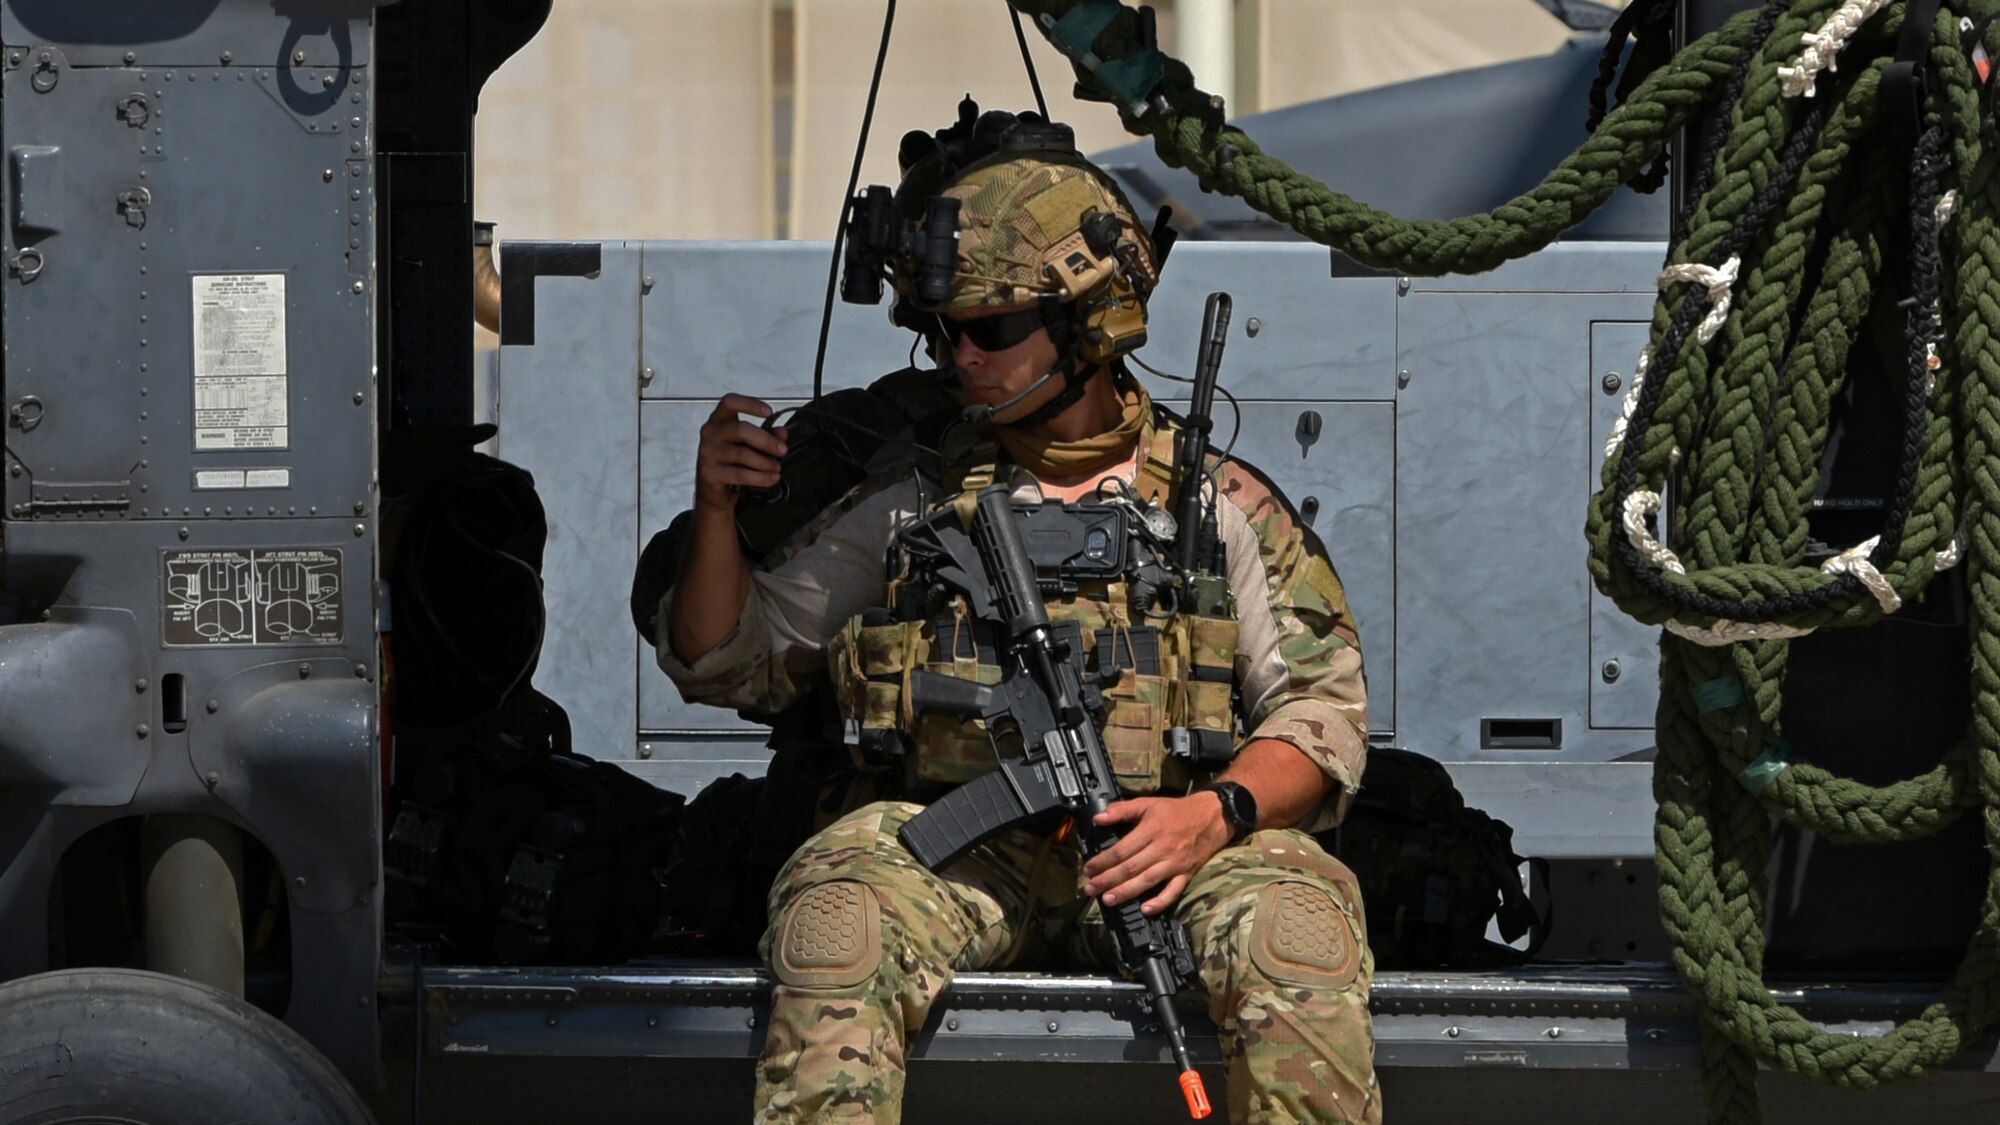 Photo of an Air Force Airman sitting and with his legs hanging off the side of an HH-60G Pavehawk